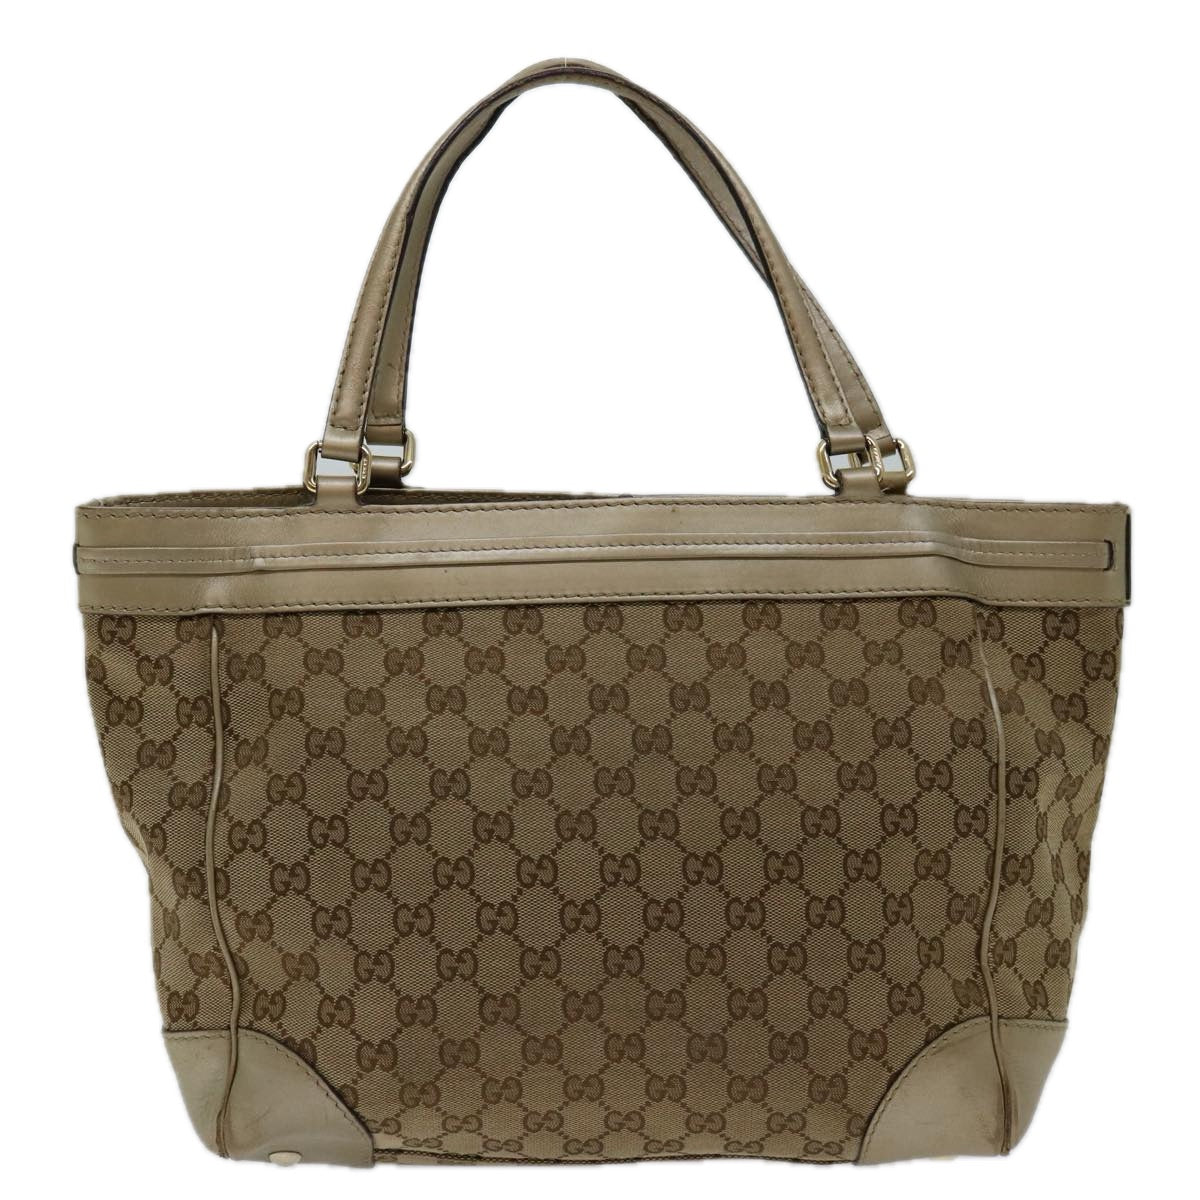 GUCCI GG Canvas Tote Bag Beige 257061 Auth bs13303 - 0